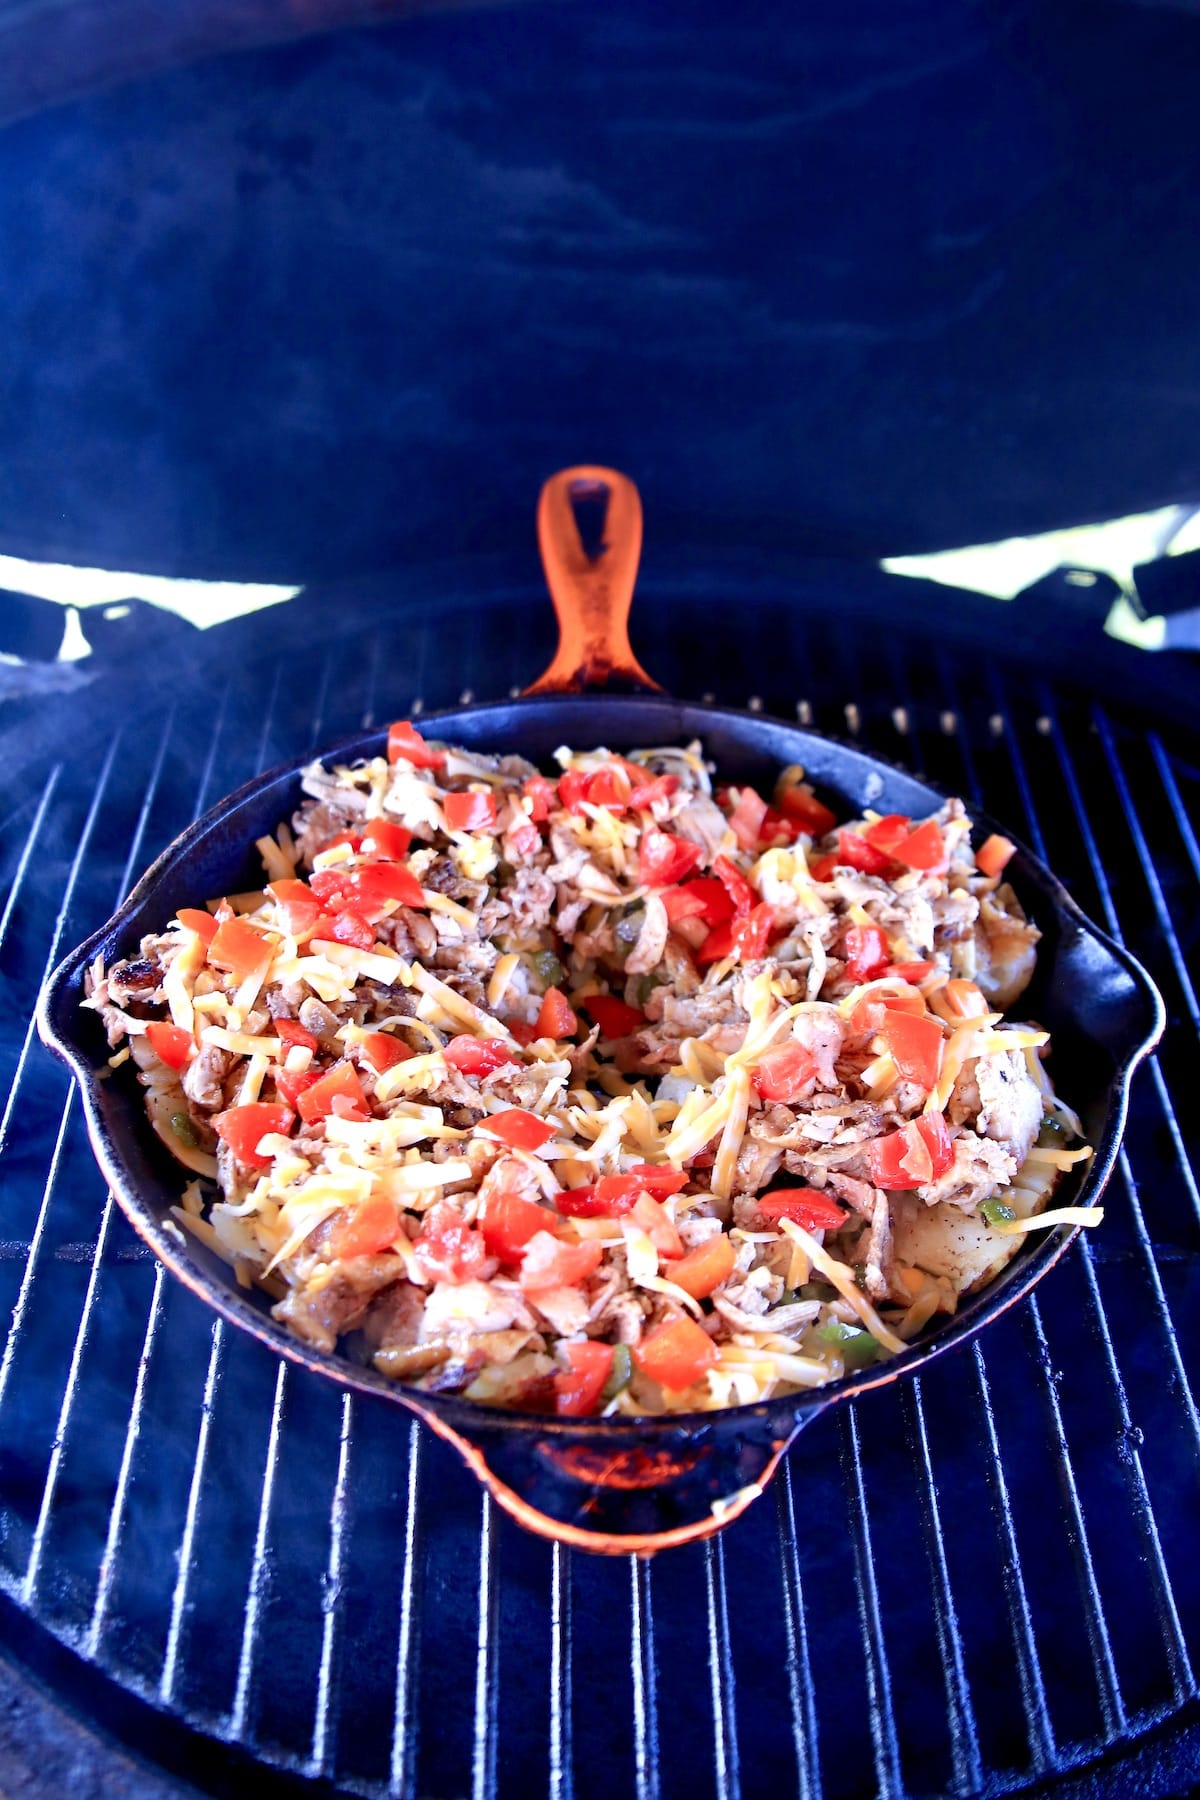 Skillet with chicken stuffed potatoes on a grill.